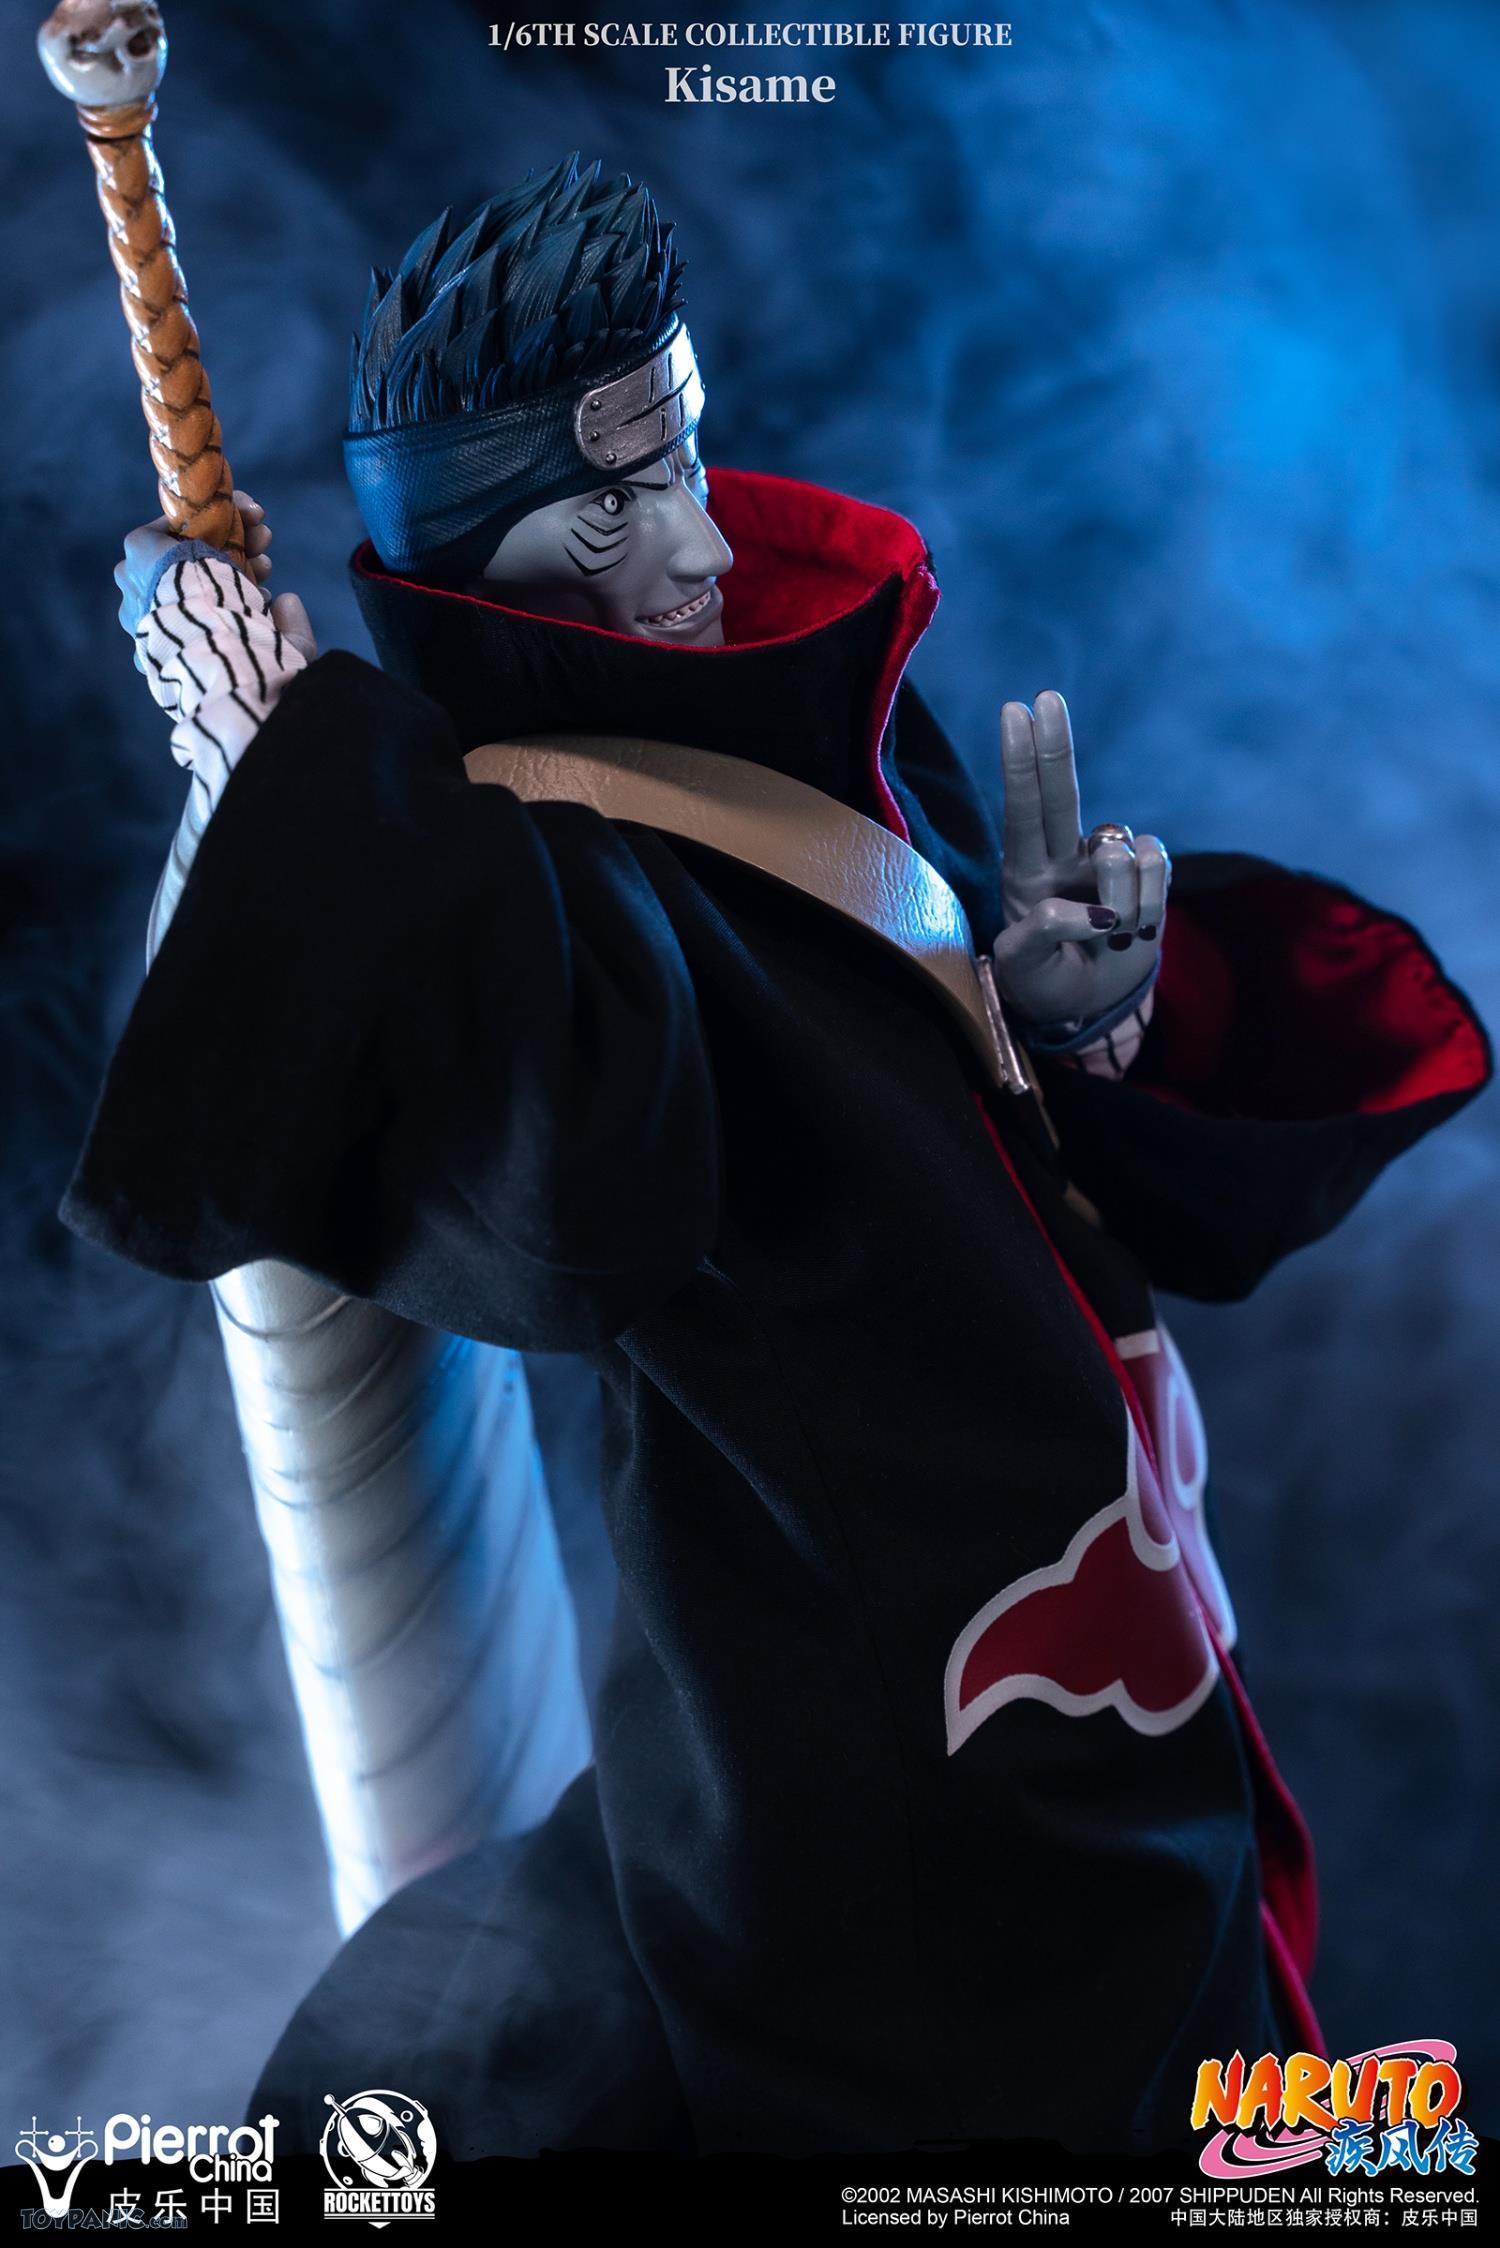 Male - NEW PRODUCT: Rocket Toys ROC-007 1/6 Scale Kisame 221202460436PM_37297